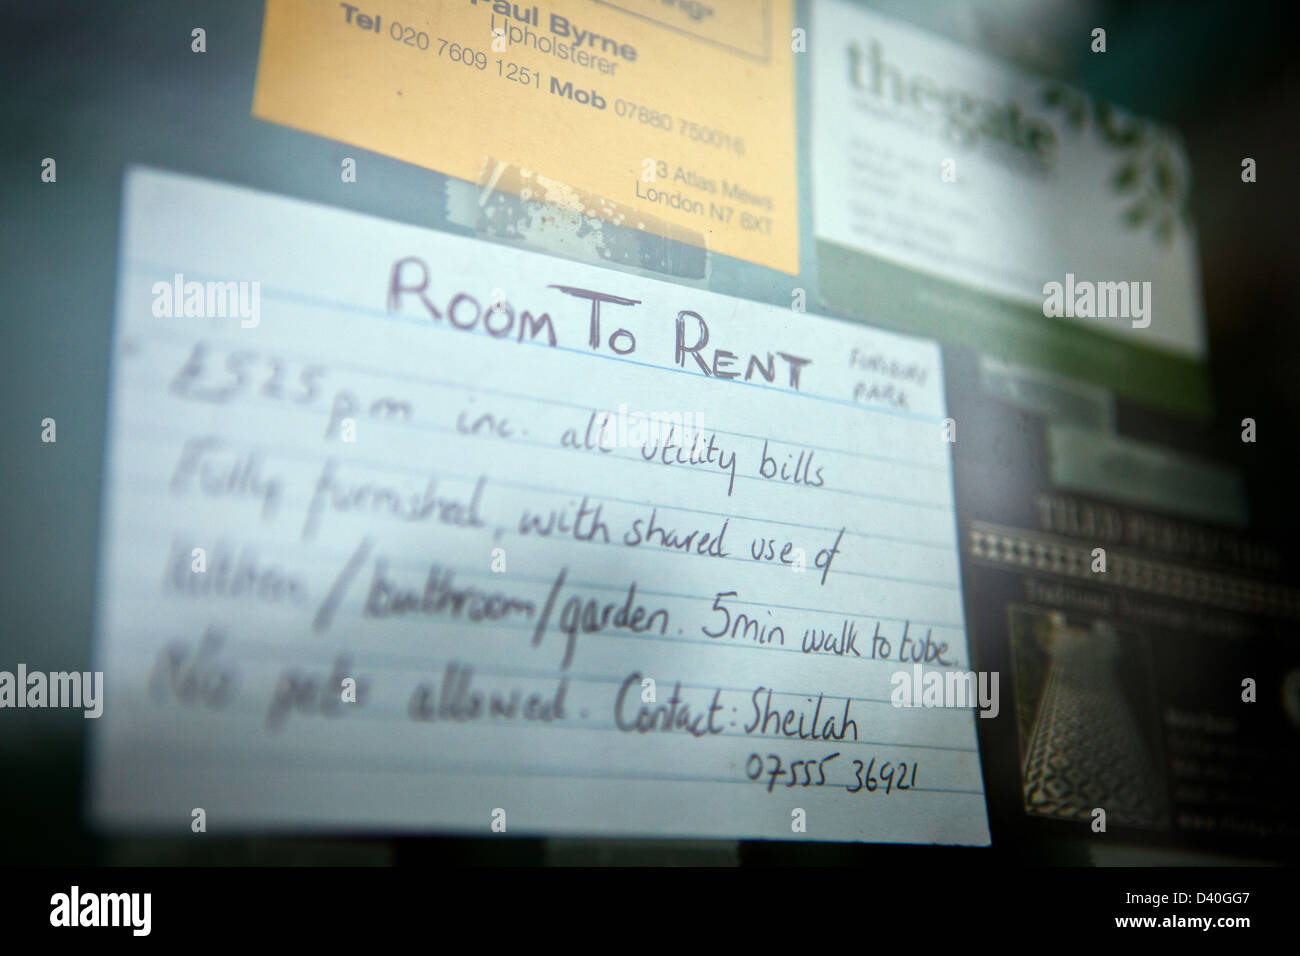 Room to Let sign in shop window Stock Photo